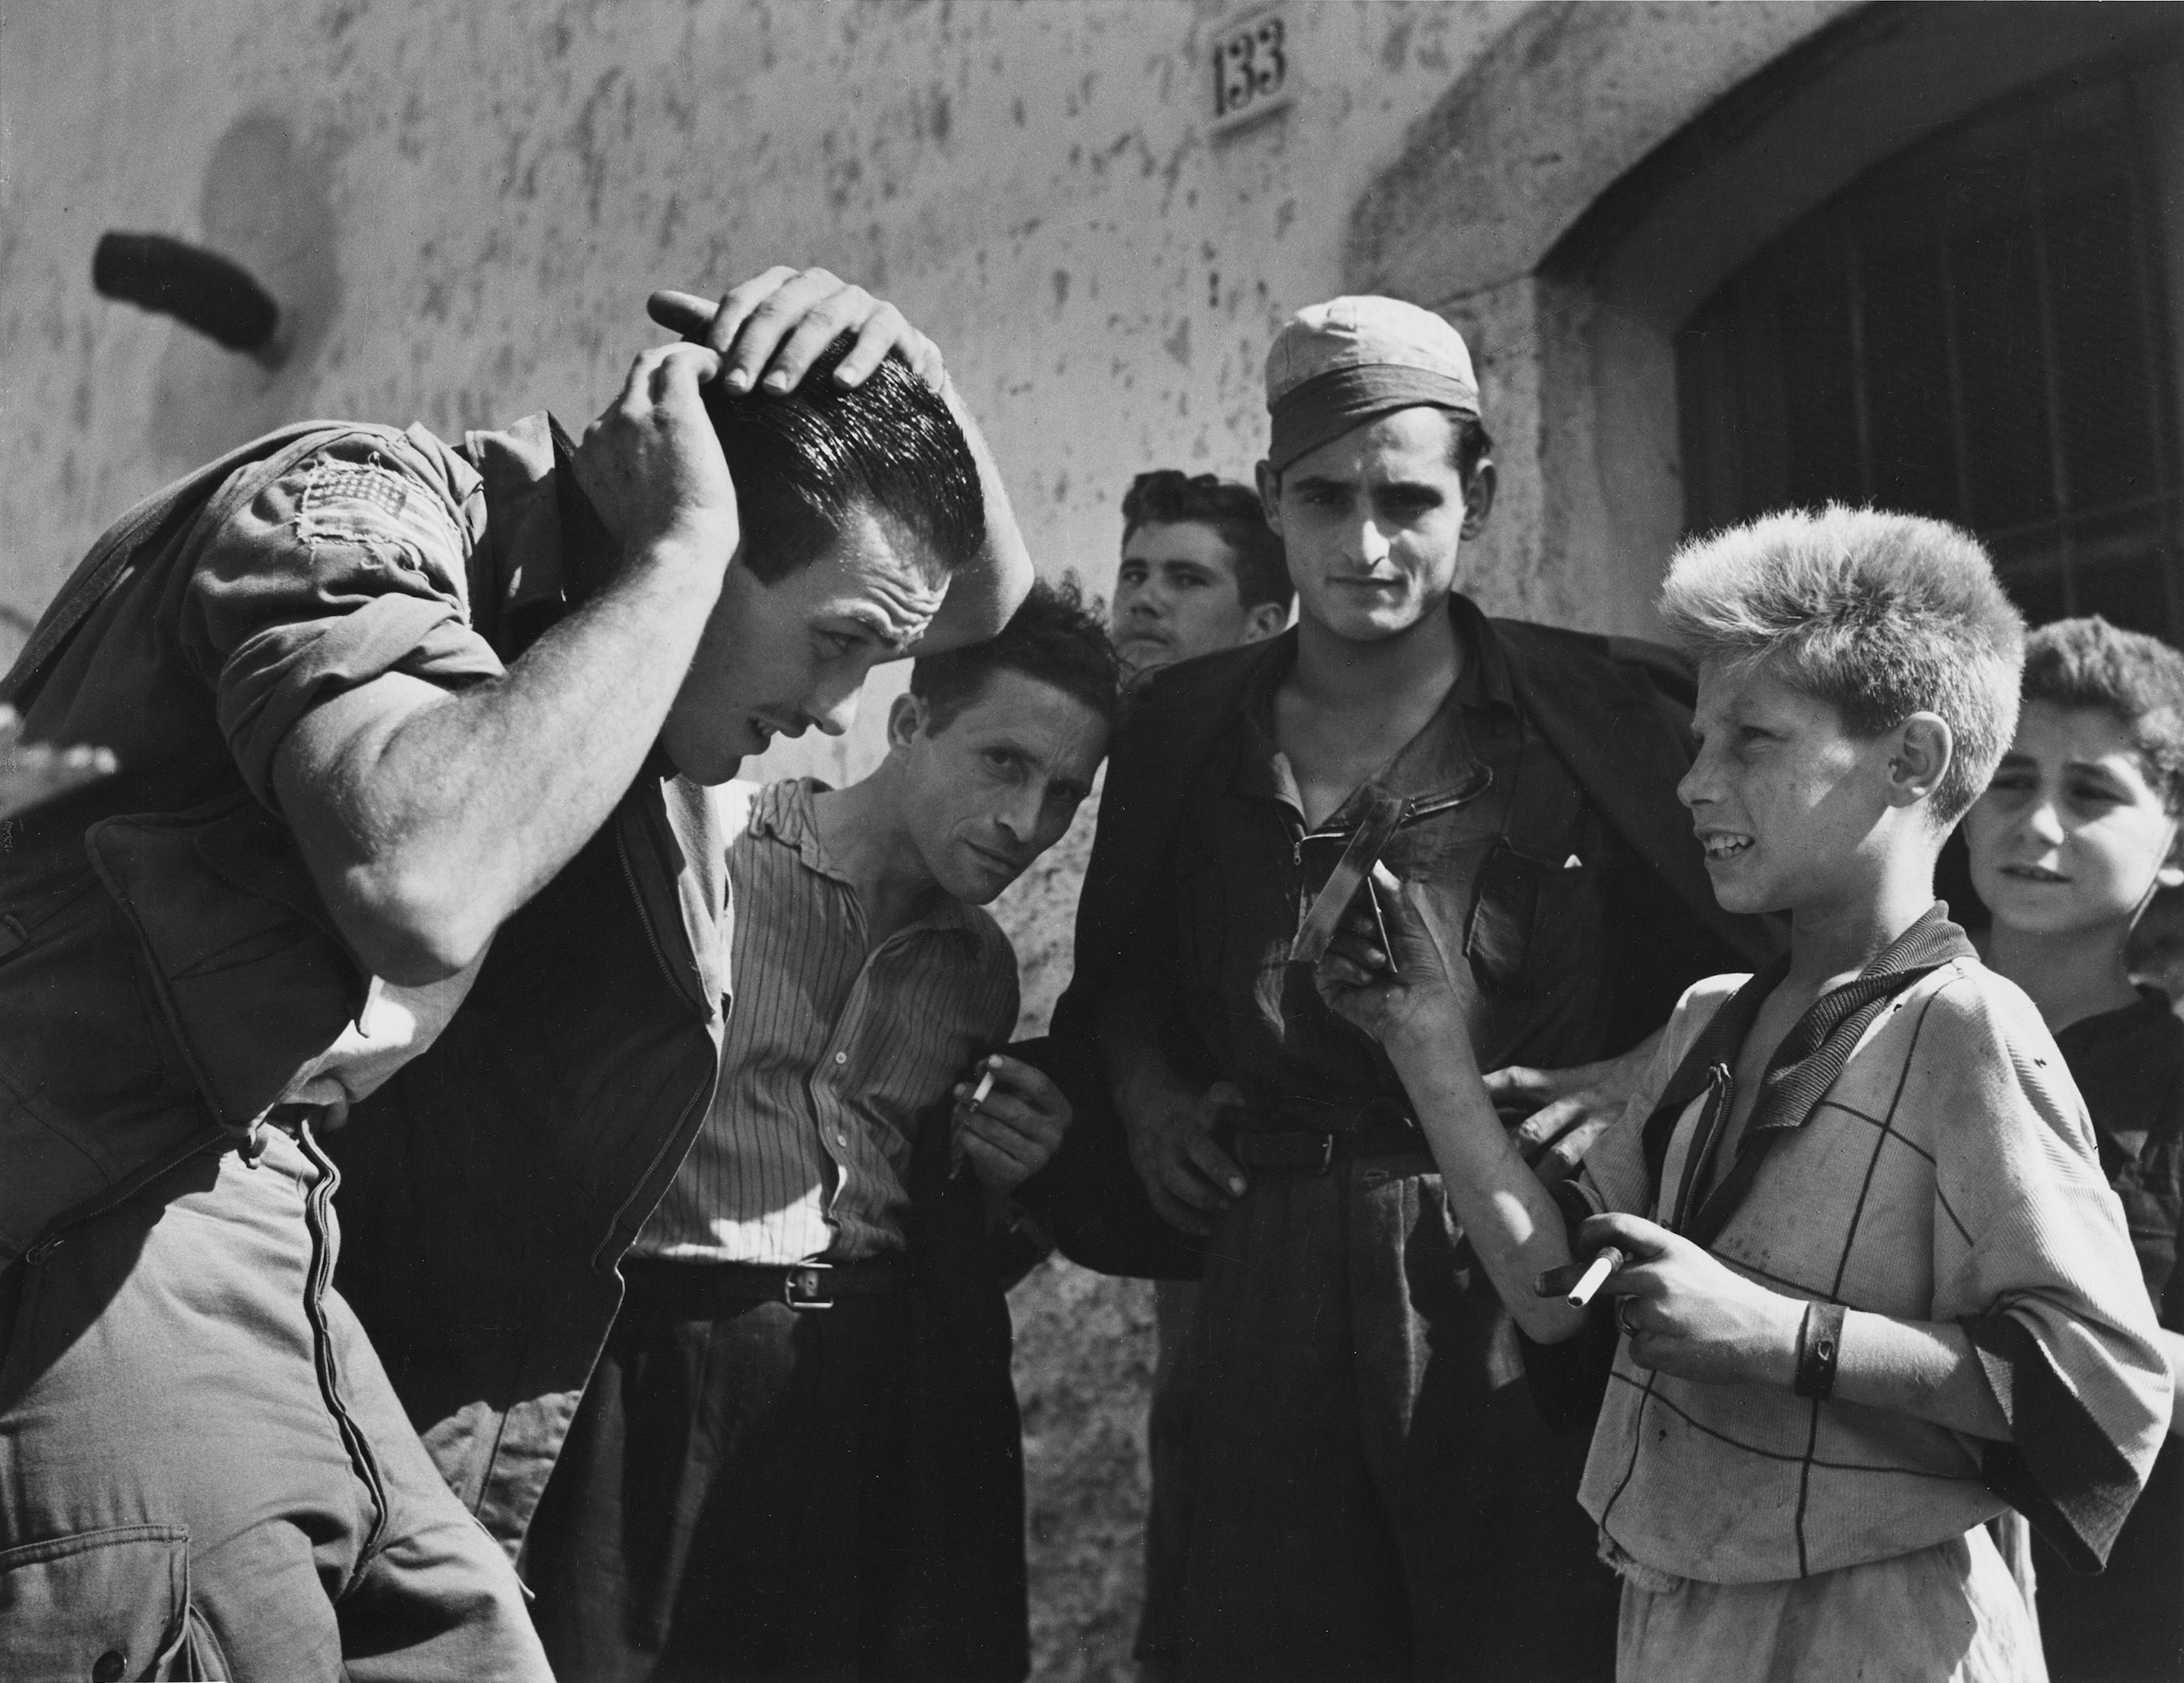 An American GI stationed in Naples spruces himself up with the help of the locals, 1943.

All available sizes and editions:
16" x 20", Edition size 25
30"x 40", Edition size 25
40" x 60", Edition size 25

This photograph will be printed once payment